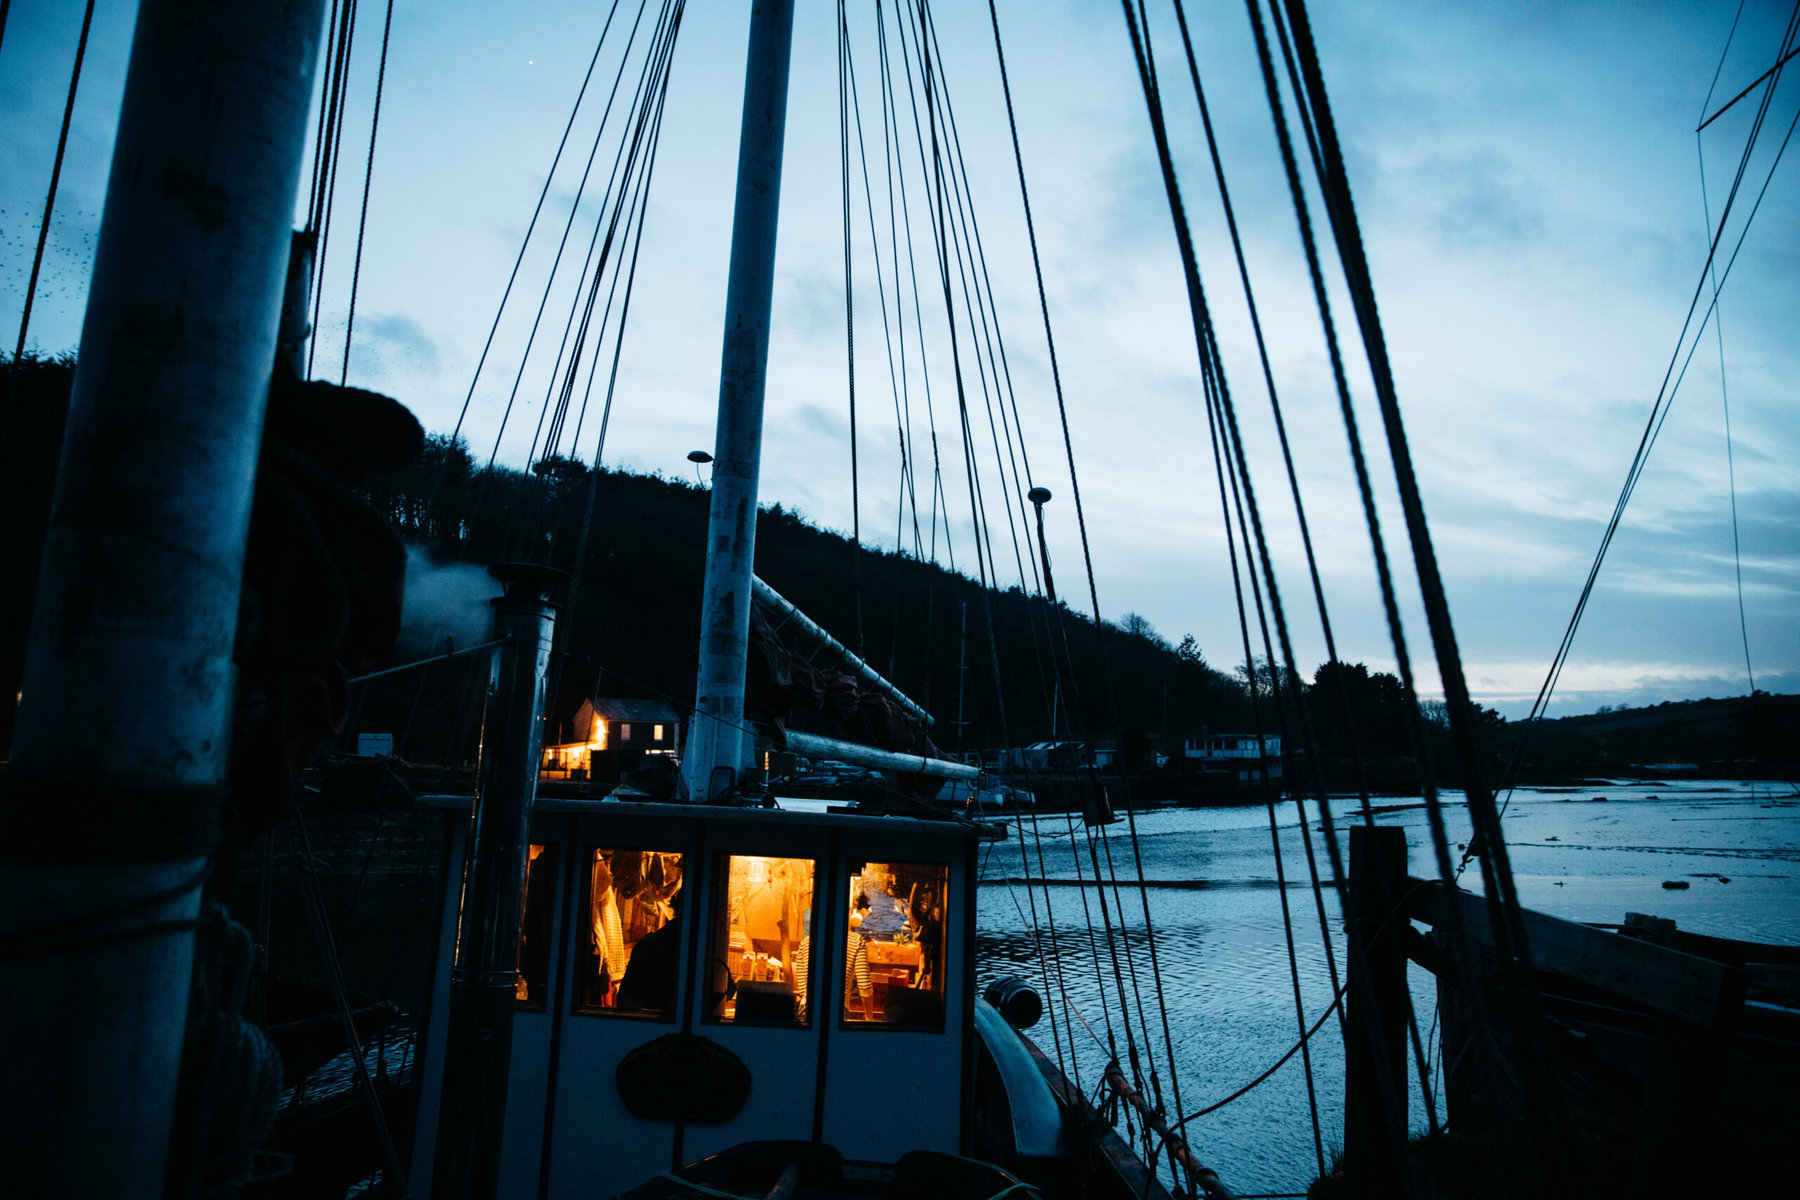 Sailing ship Annette at night